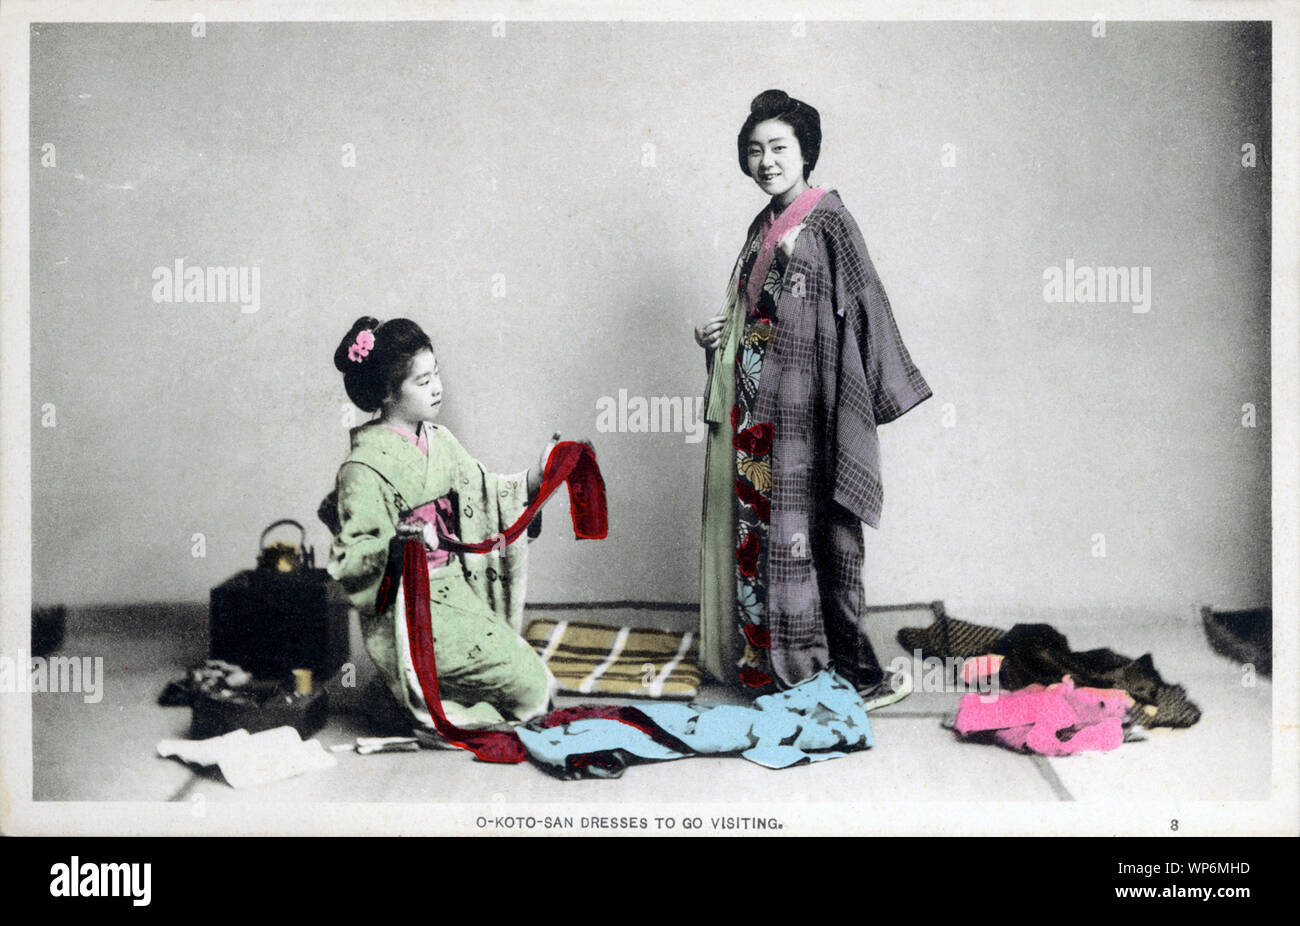 [ 1900s Japan - Japanese Woman Dressing ] —   A day in the life of a young Japanese woman during the Meiji and Taisho Periods in the early 20th century:  3. O-KOTO-SAN DRESSES TO GO VISITING.  20th century vintage postcard. Stock Photo